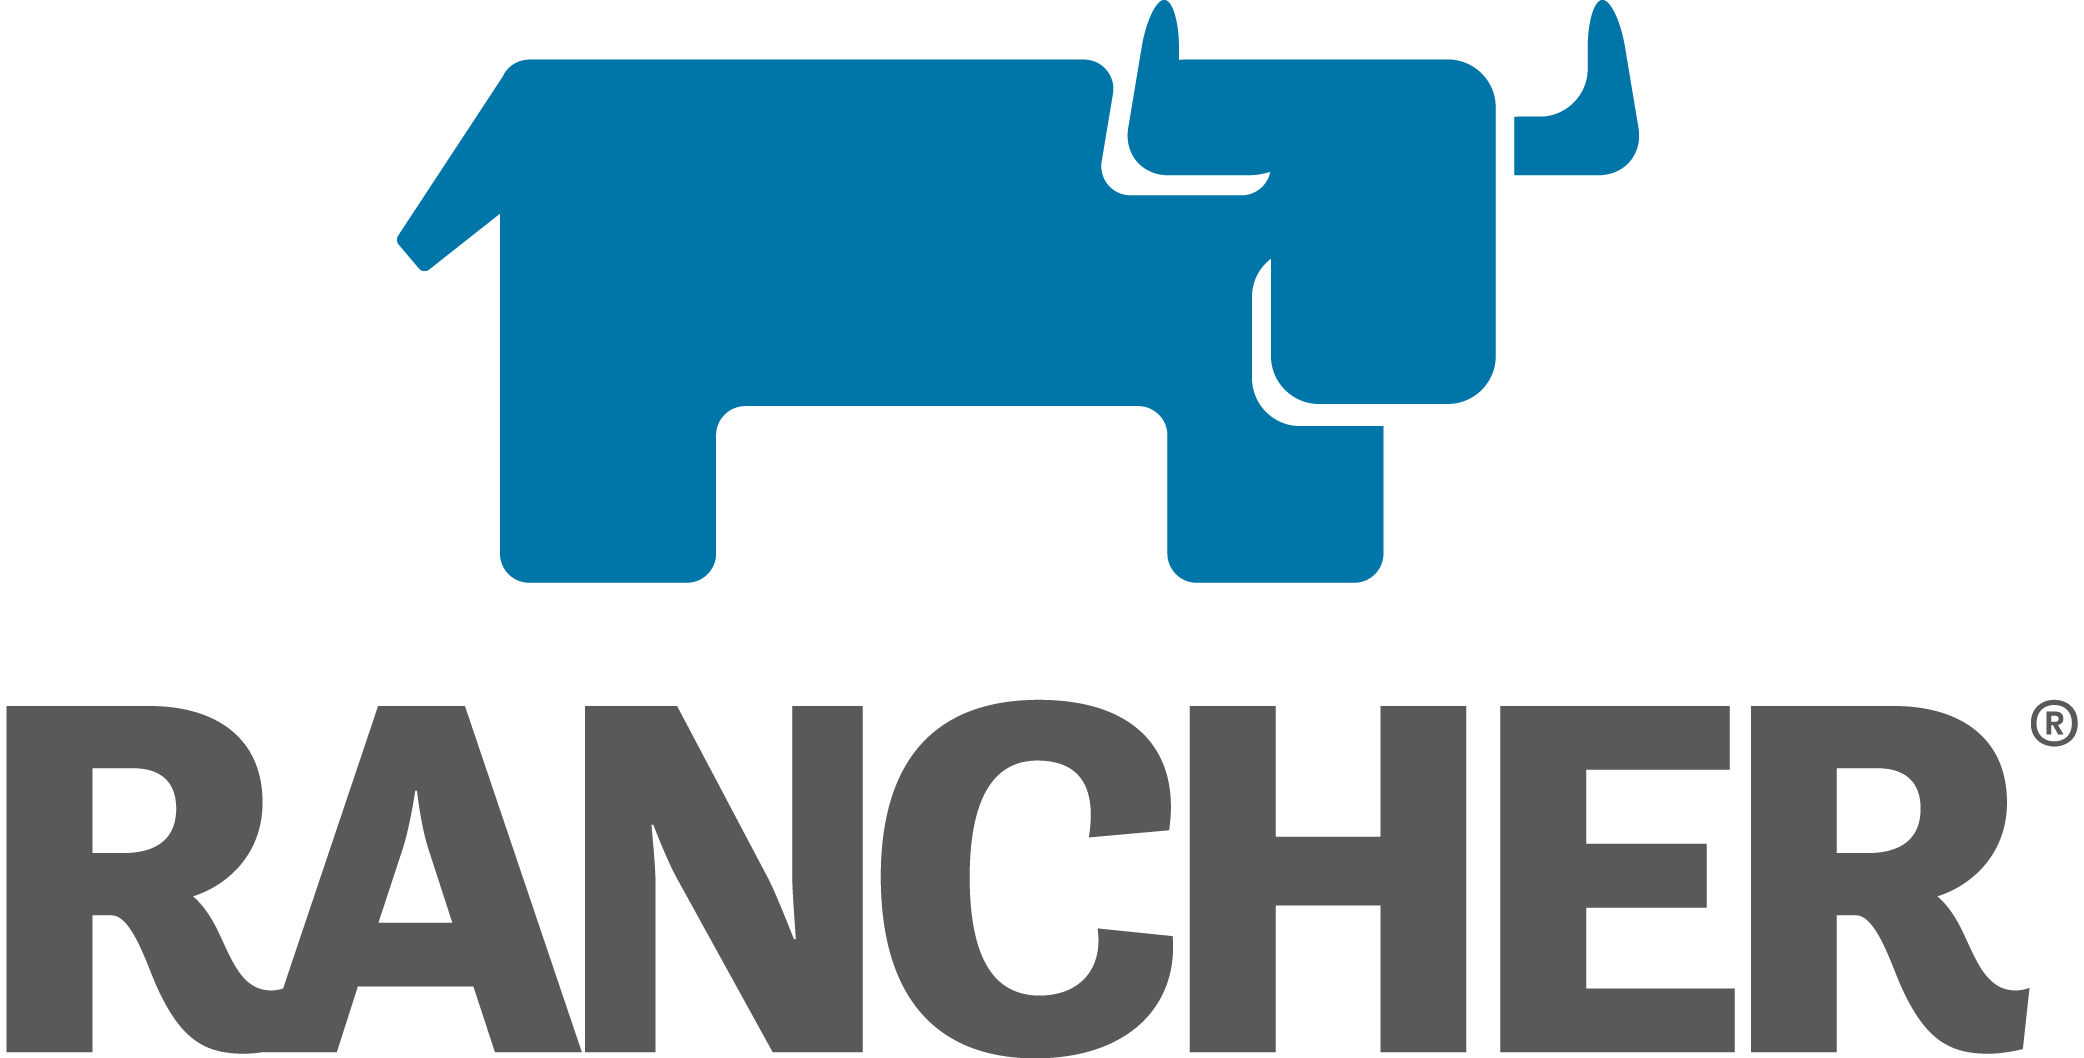 Rancher 提示no secret exists for service account cattle-system/cattle